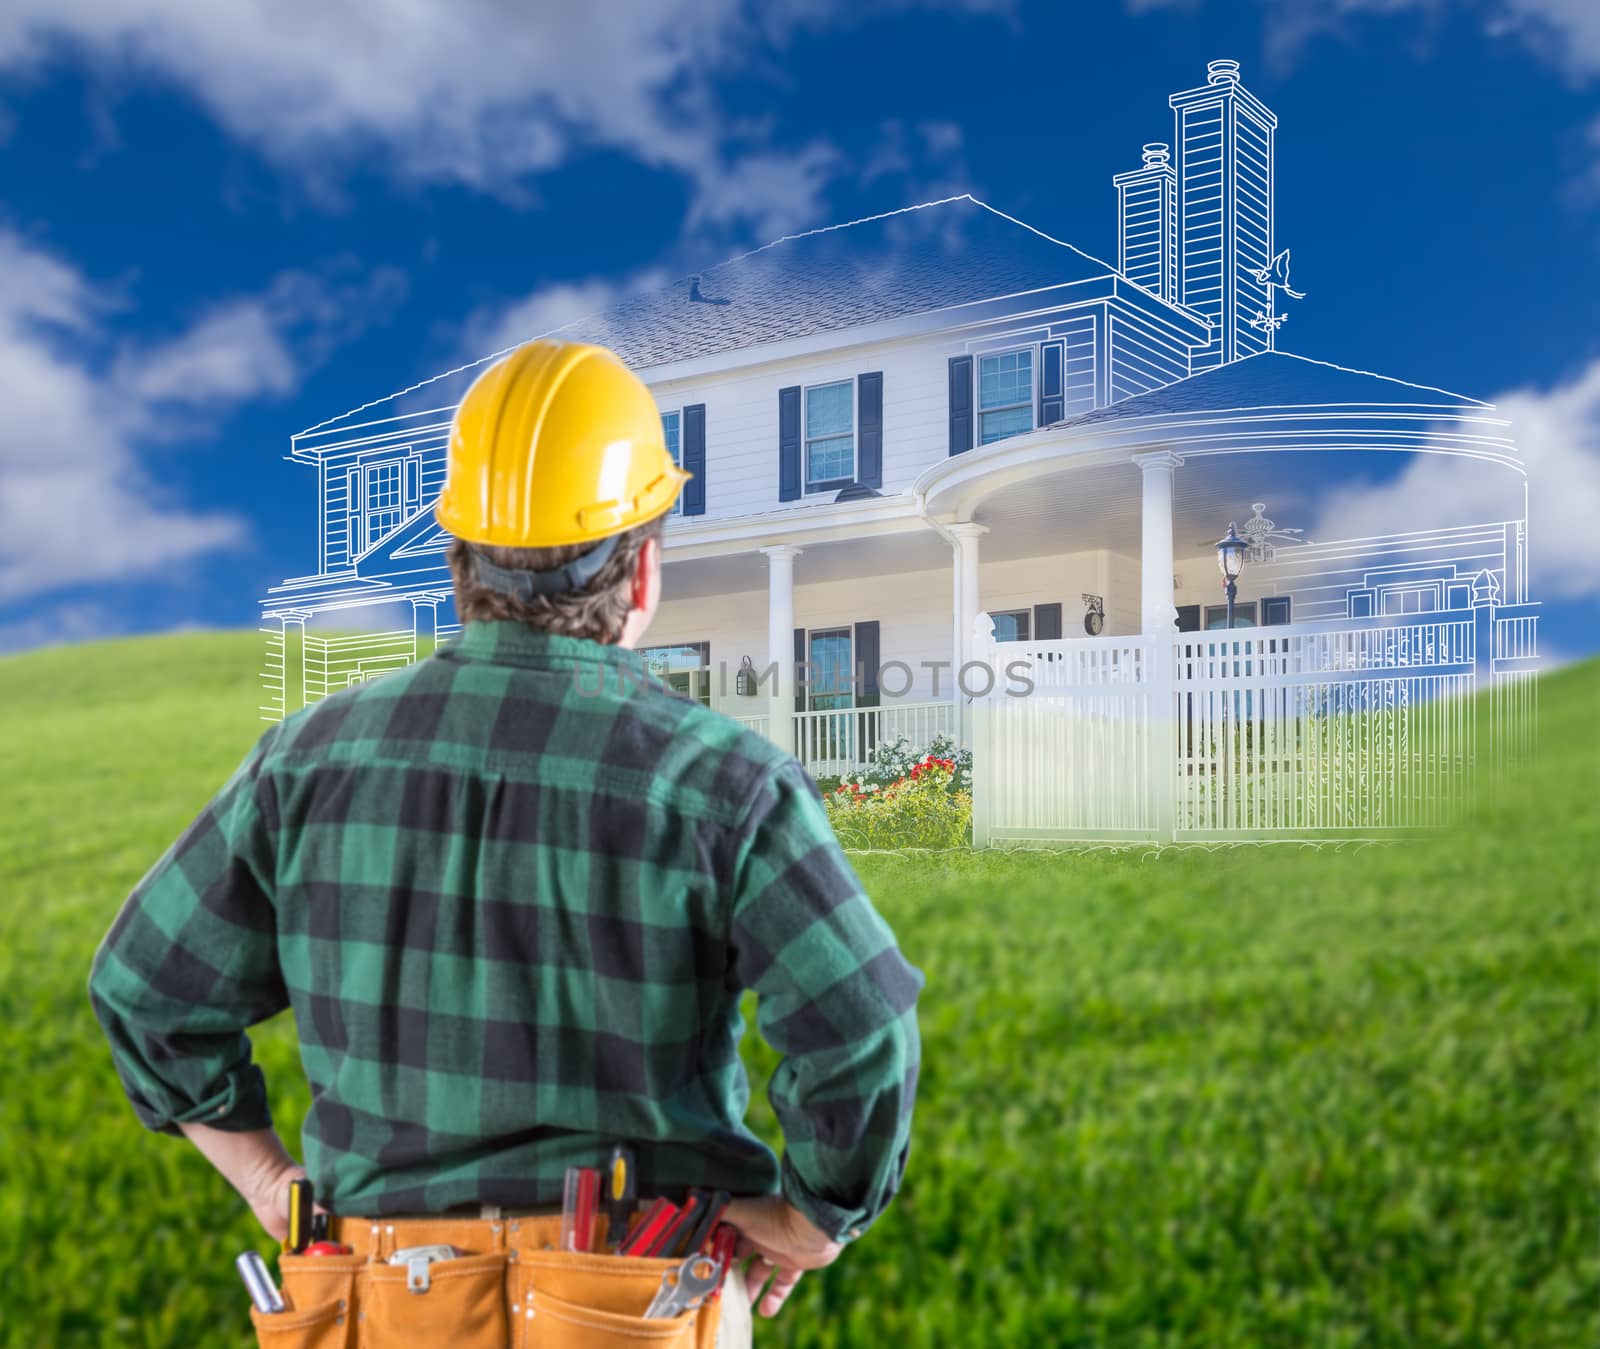 Contractor Standing Outdoors Looking Over Grass Site with Ghoste by Feverpitched